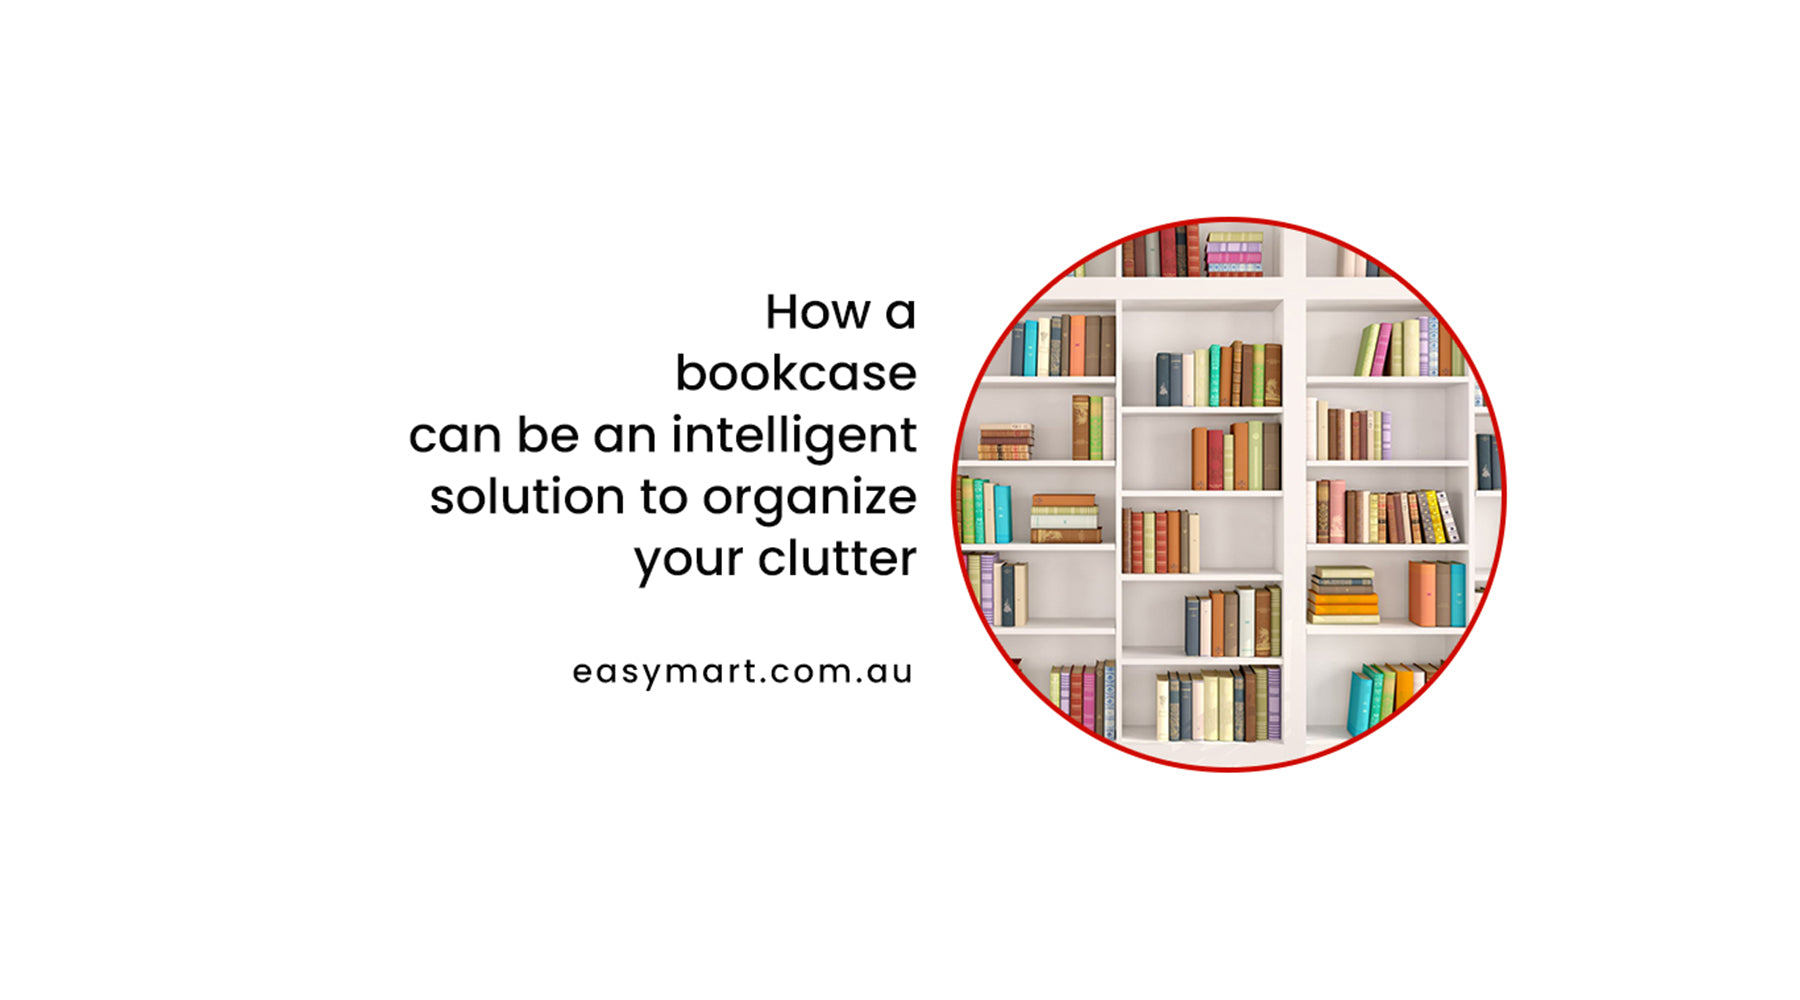 How a bookcase can be an intelligent solution to organize your clutter